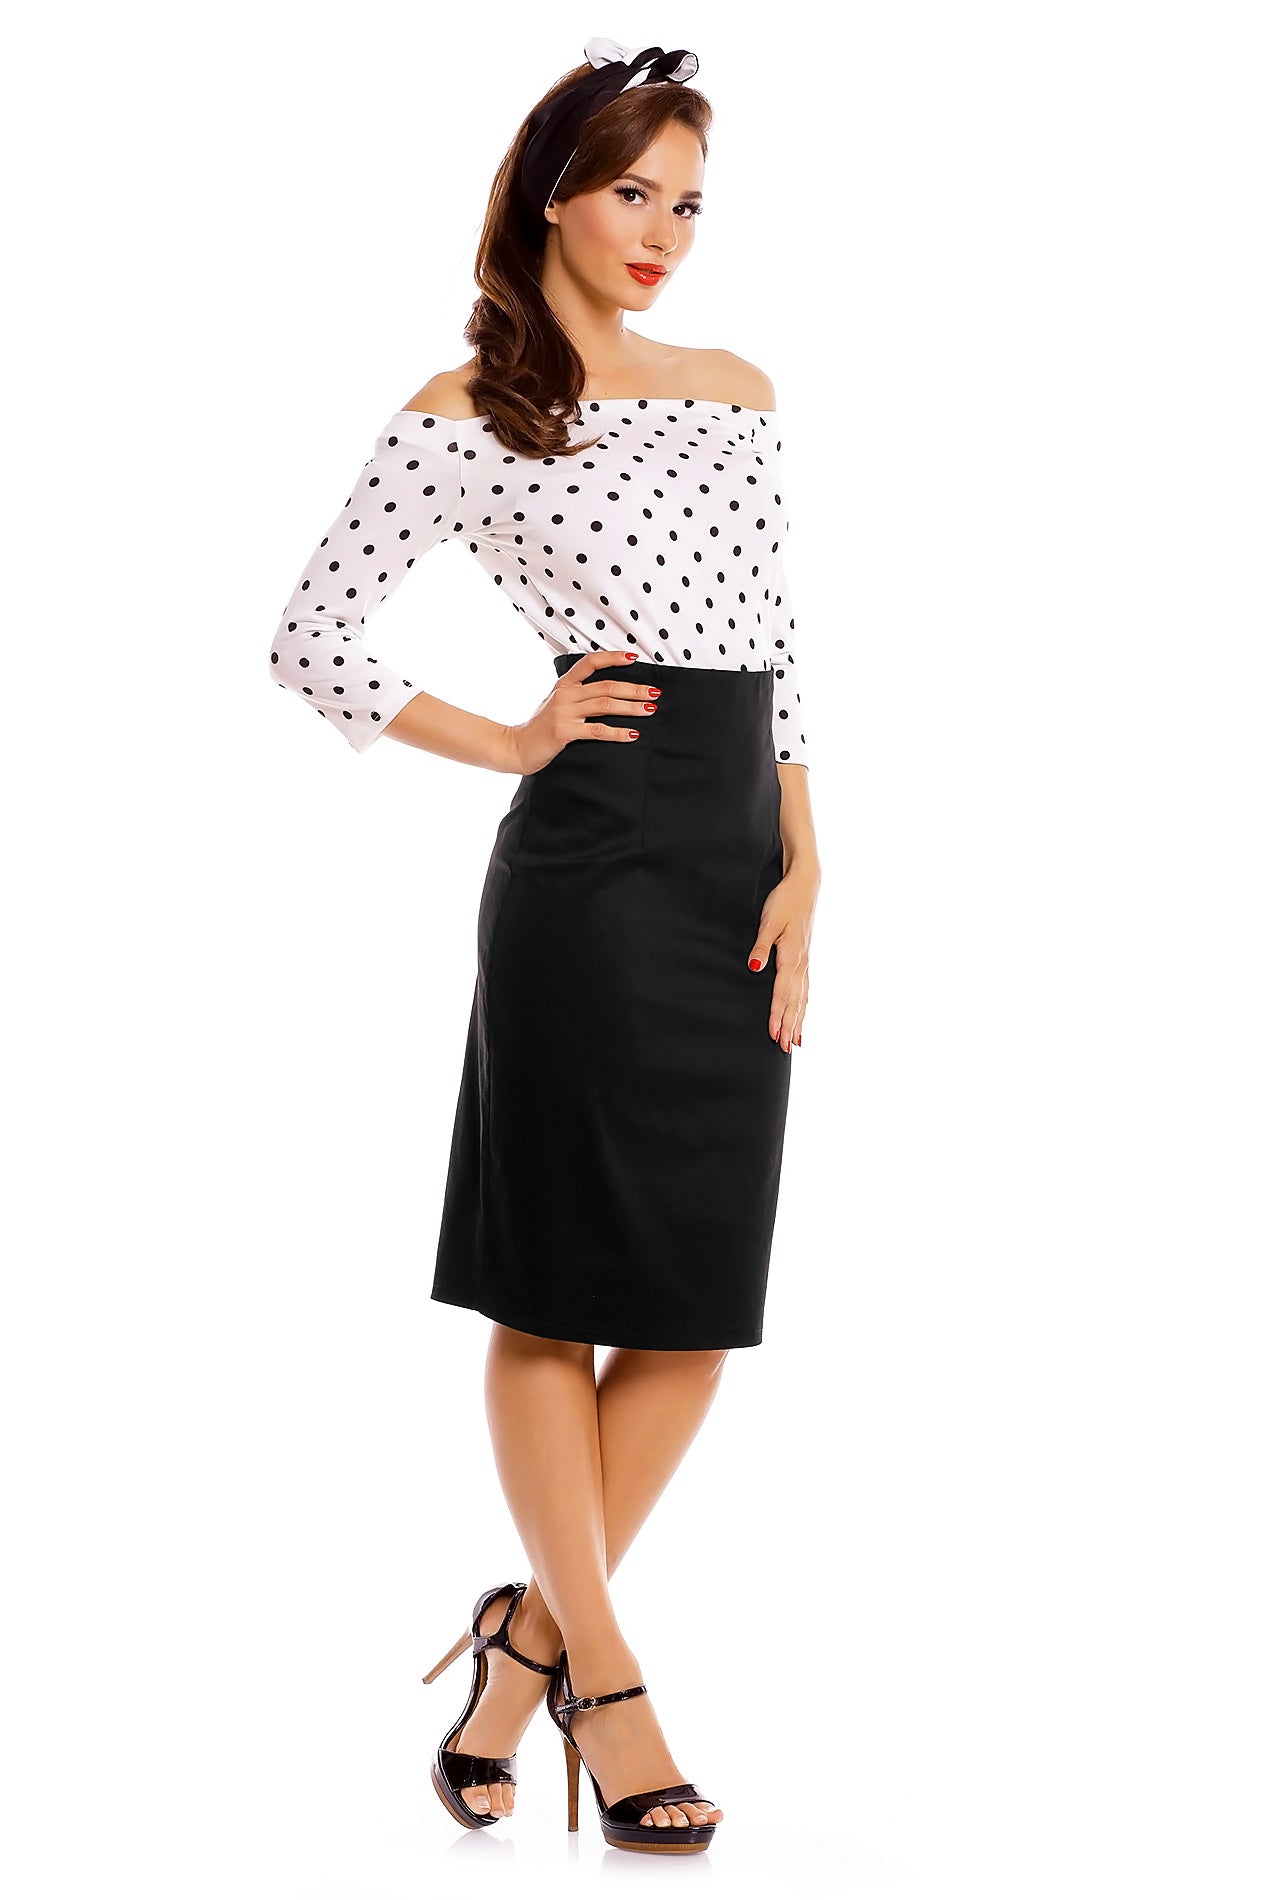 Model wearing our Gloria Rockabilly Top in White with black Polka Dots, with matching headband and skirt, side view